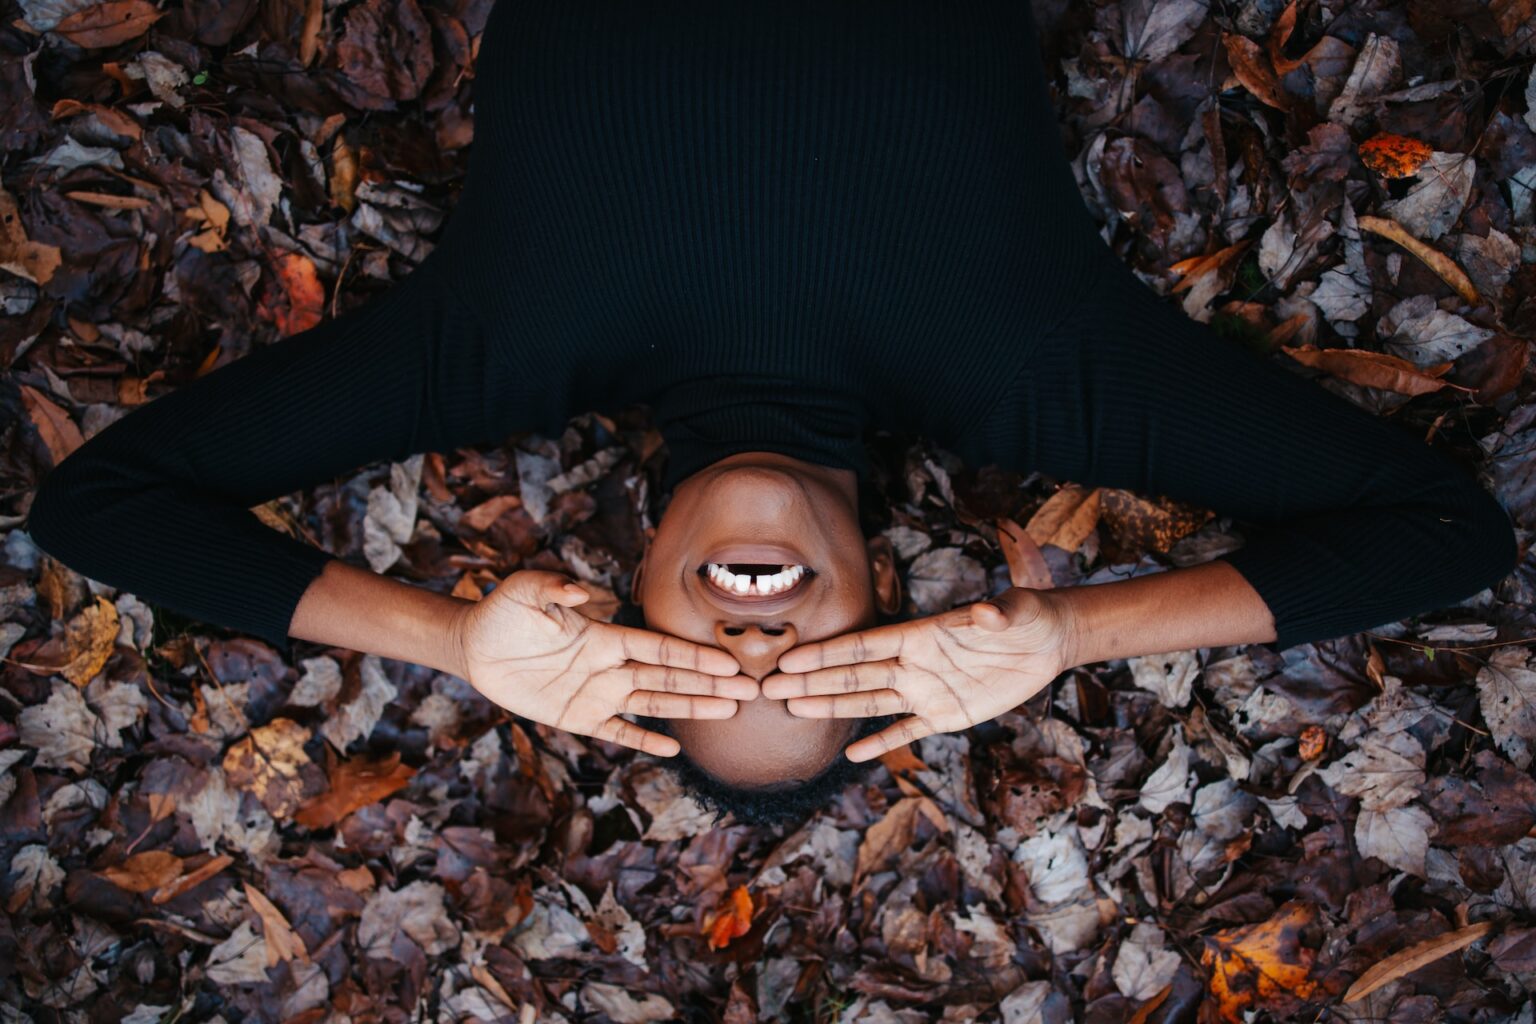 A person lying on a bed of autumn leaves, covering their eyes with their hands and smiling, reminiscent of the carefree joy one feels after an affordable Dallas dentist visit.